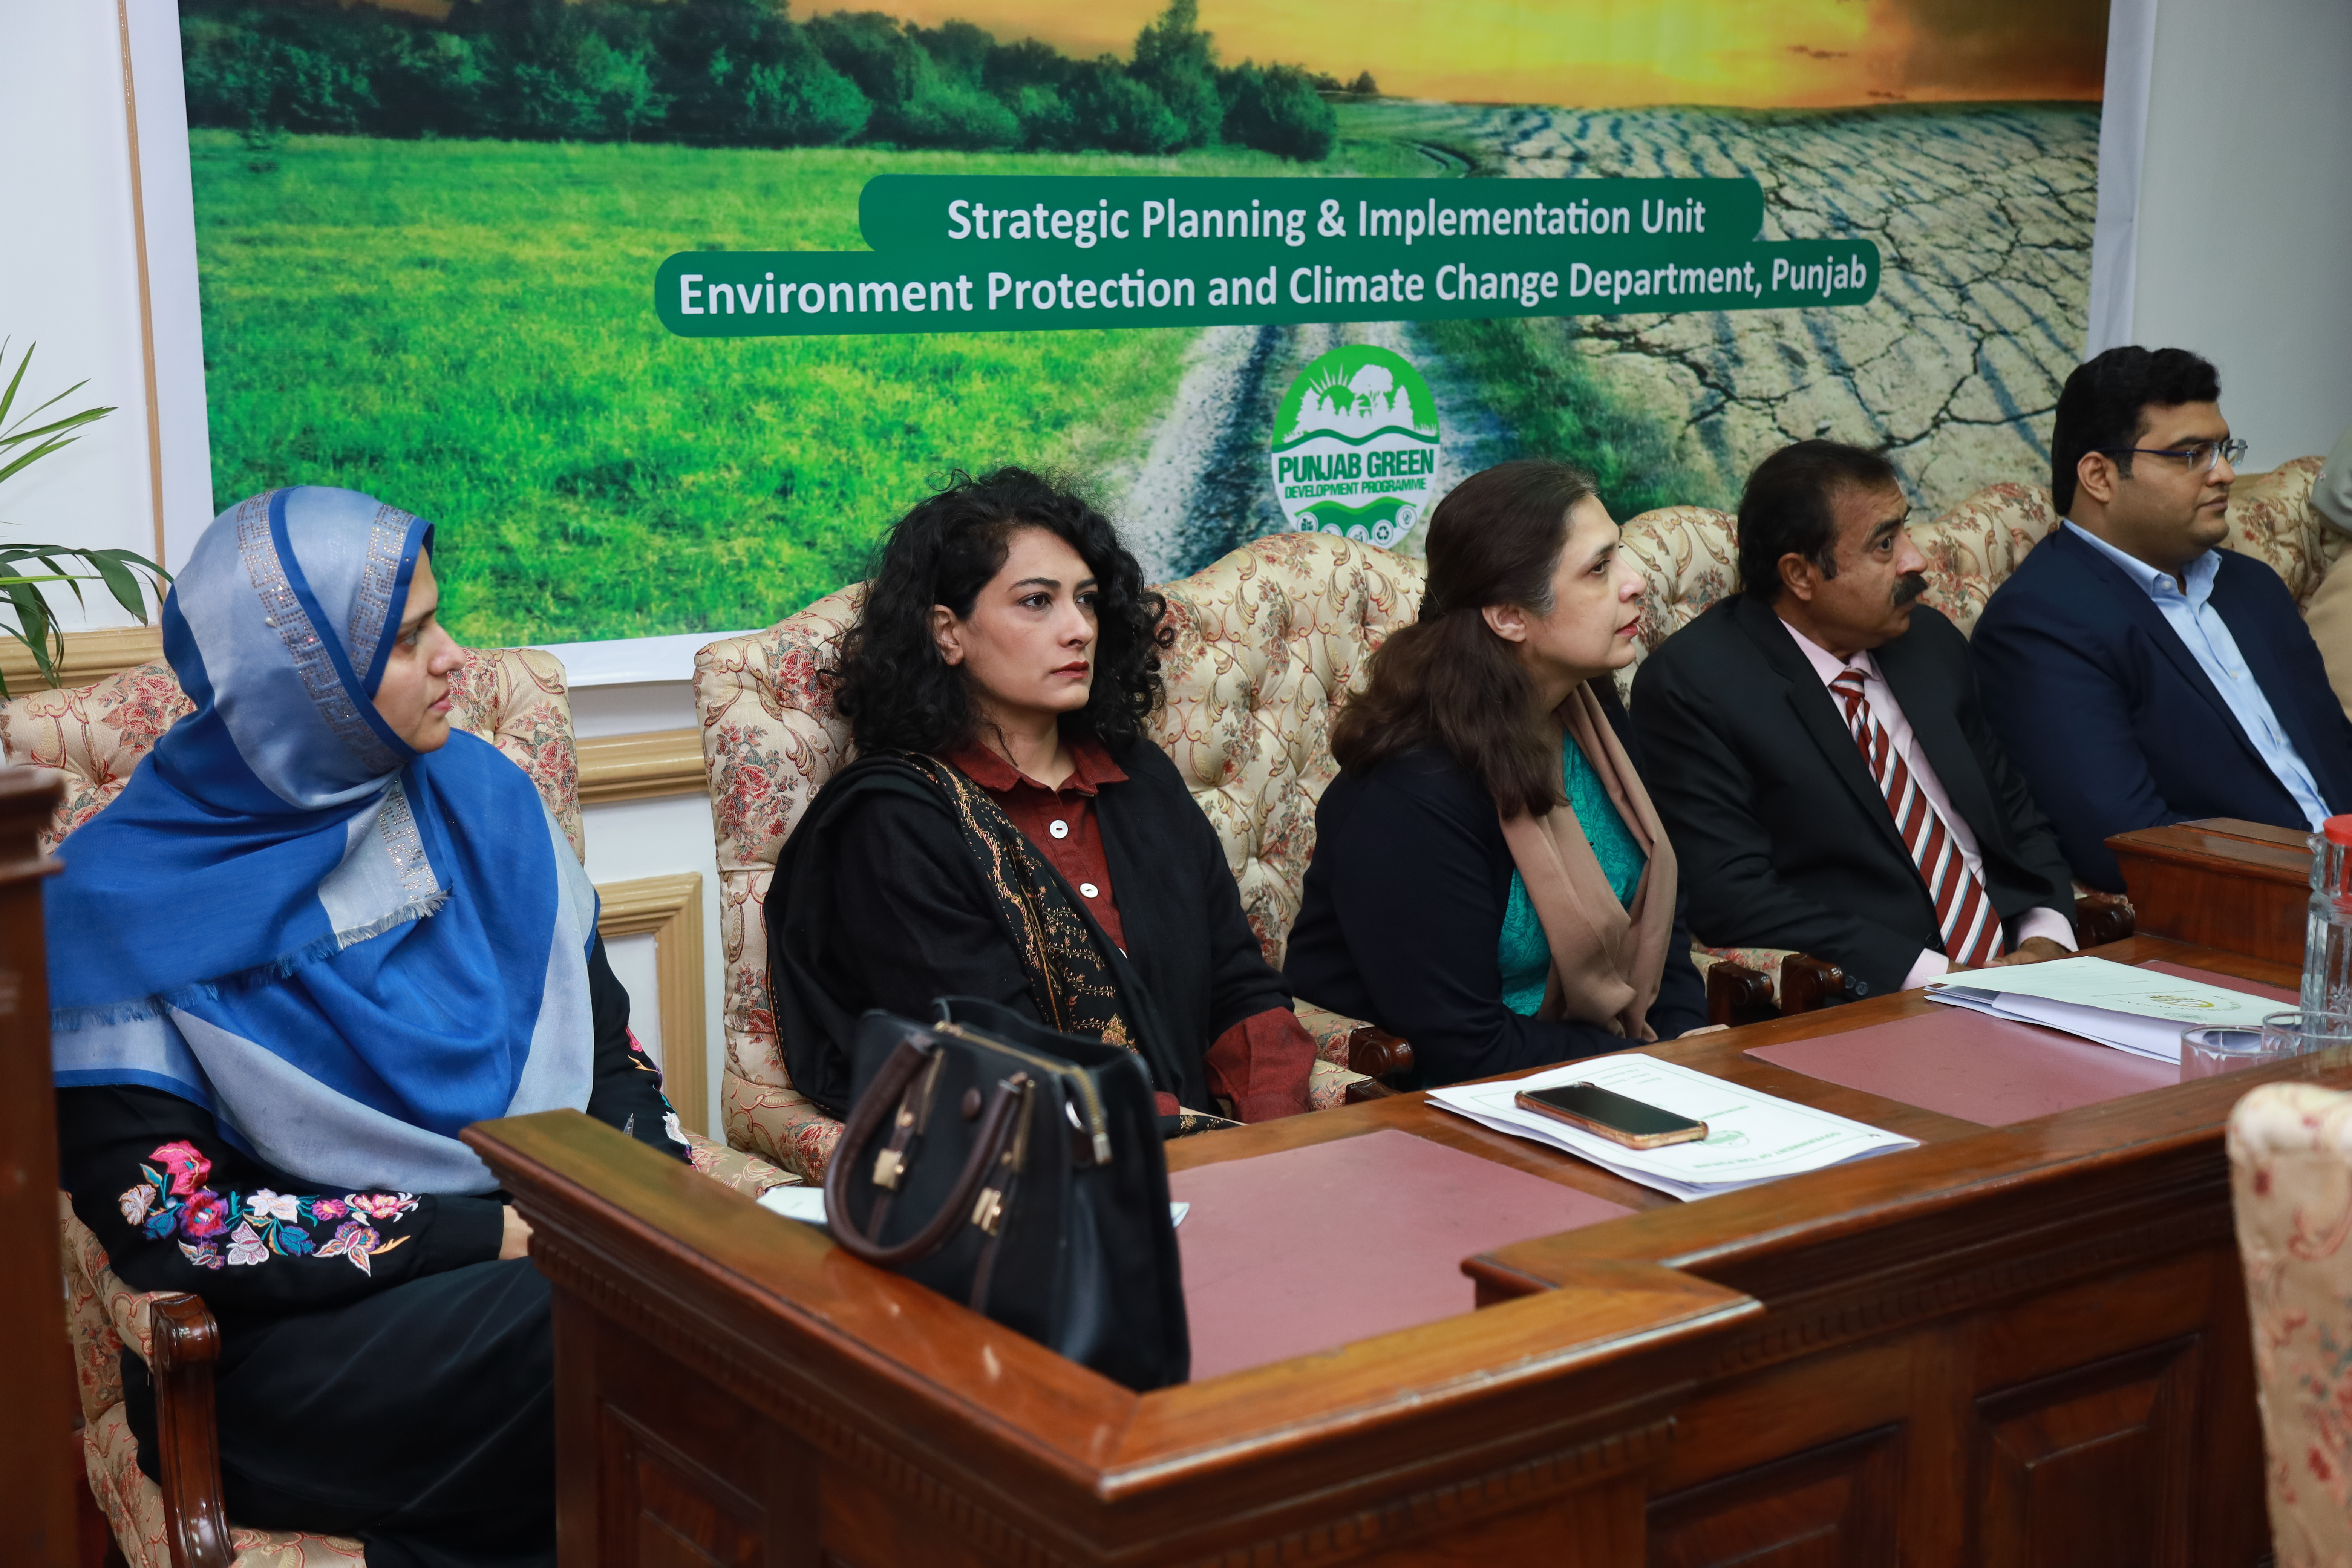 Consultative Session on Draft Climate Change Policy of Punjab